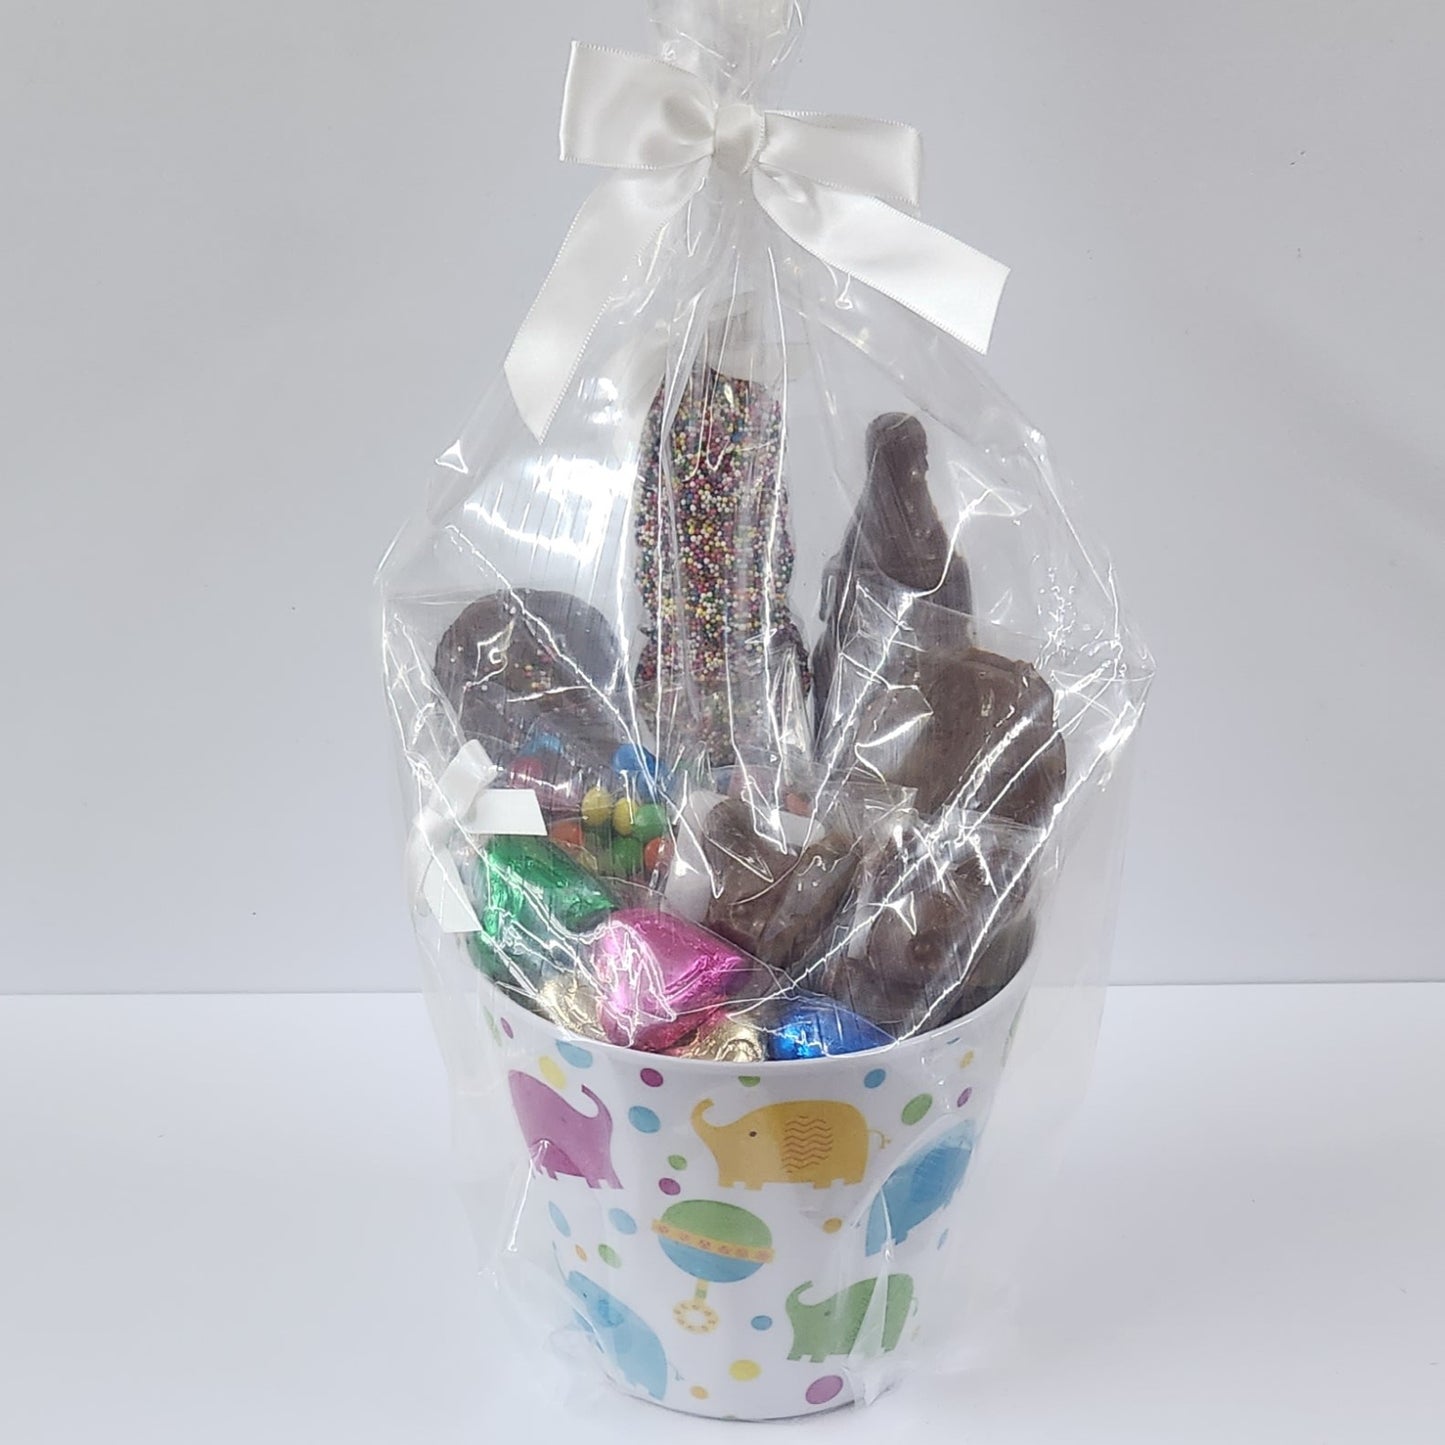 Babu Gift Basket featuring chocolate treats wrapped in plastic with a white bow